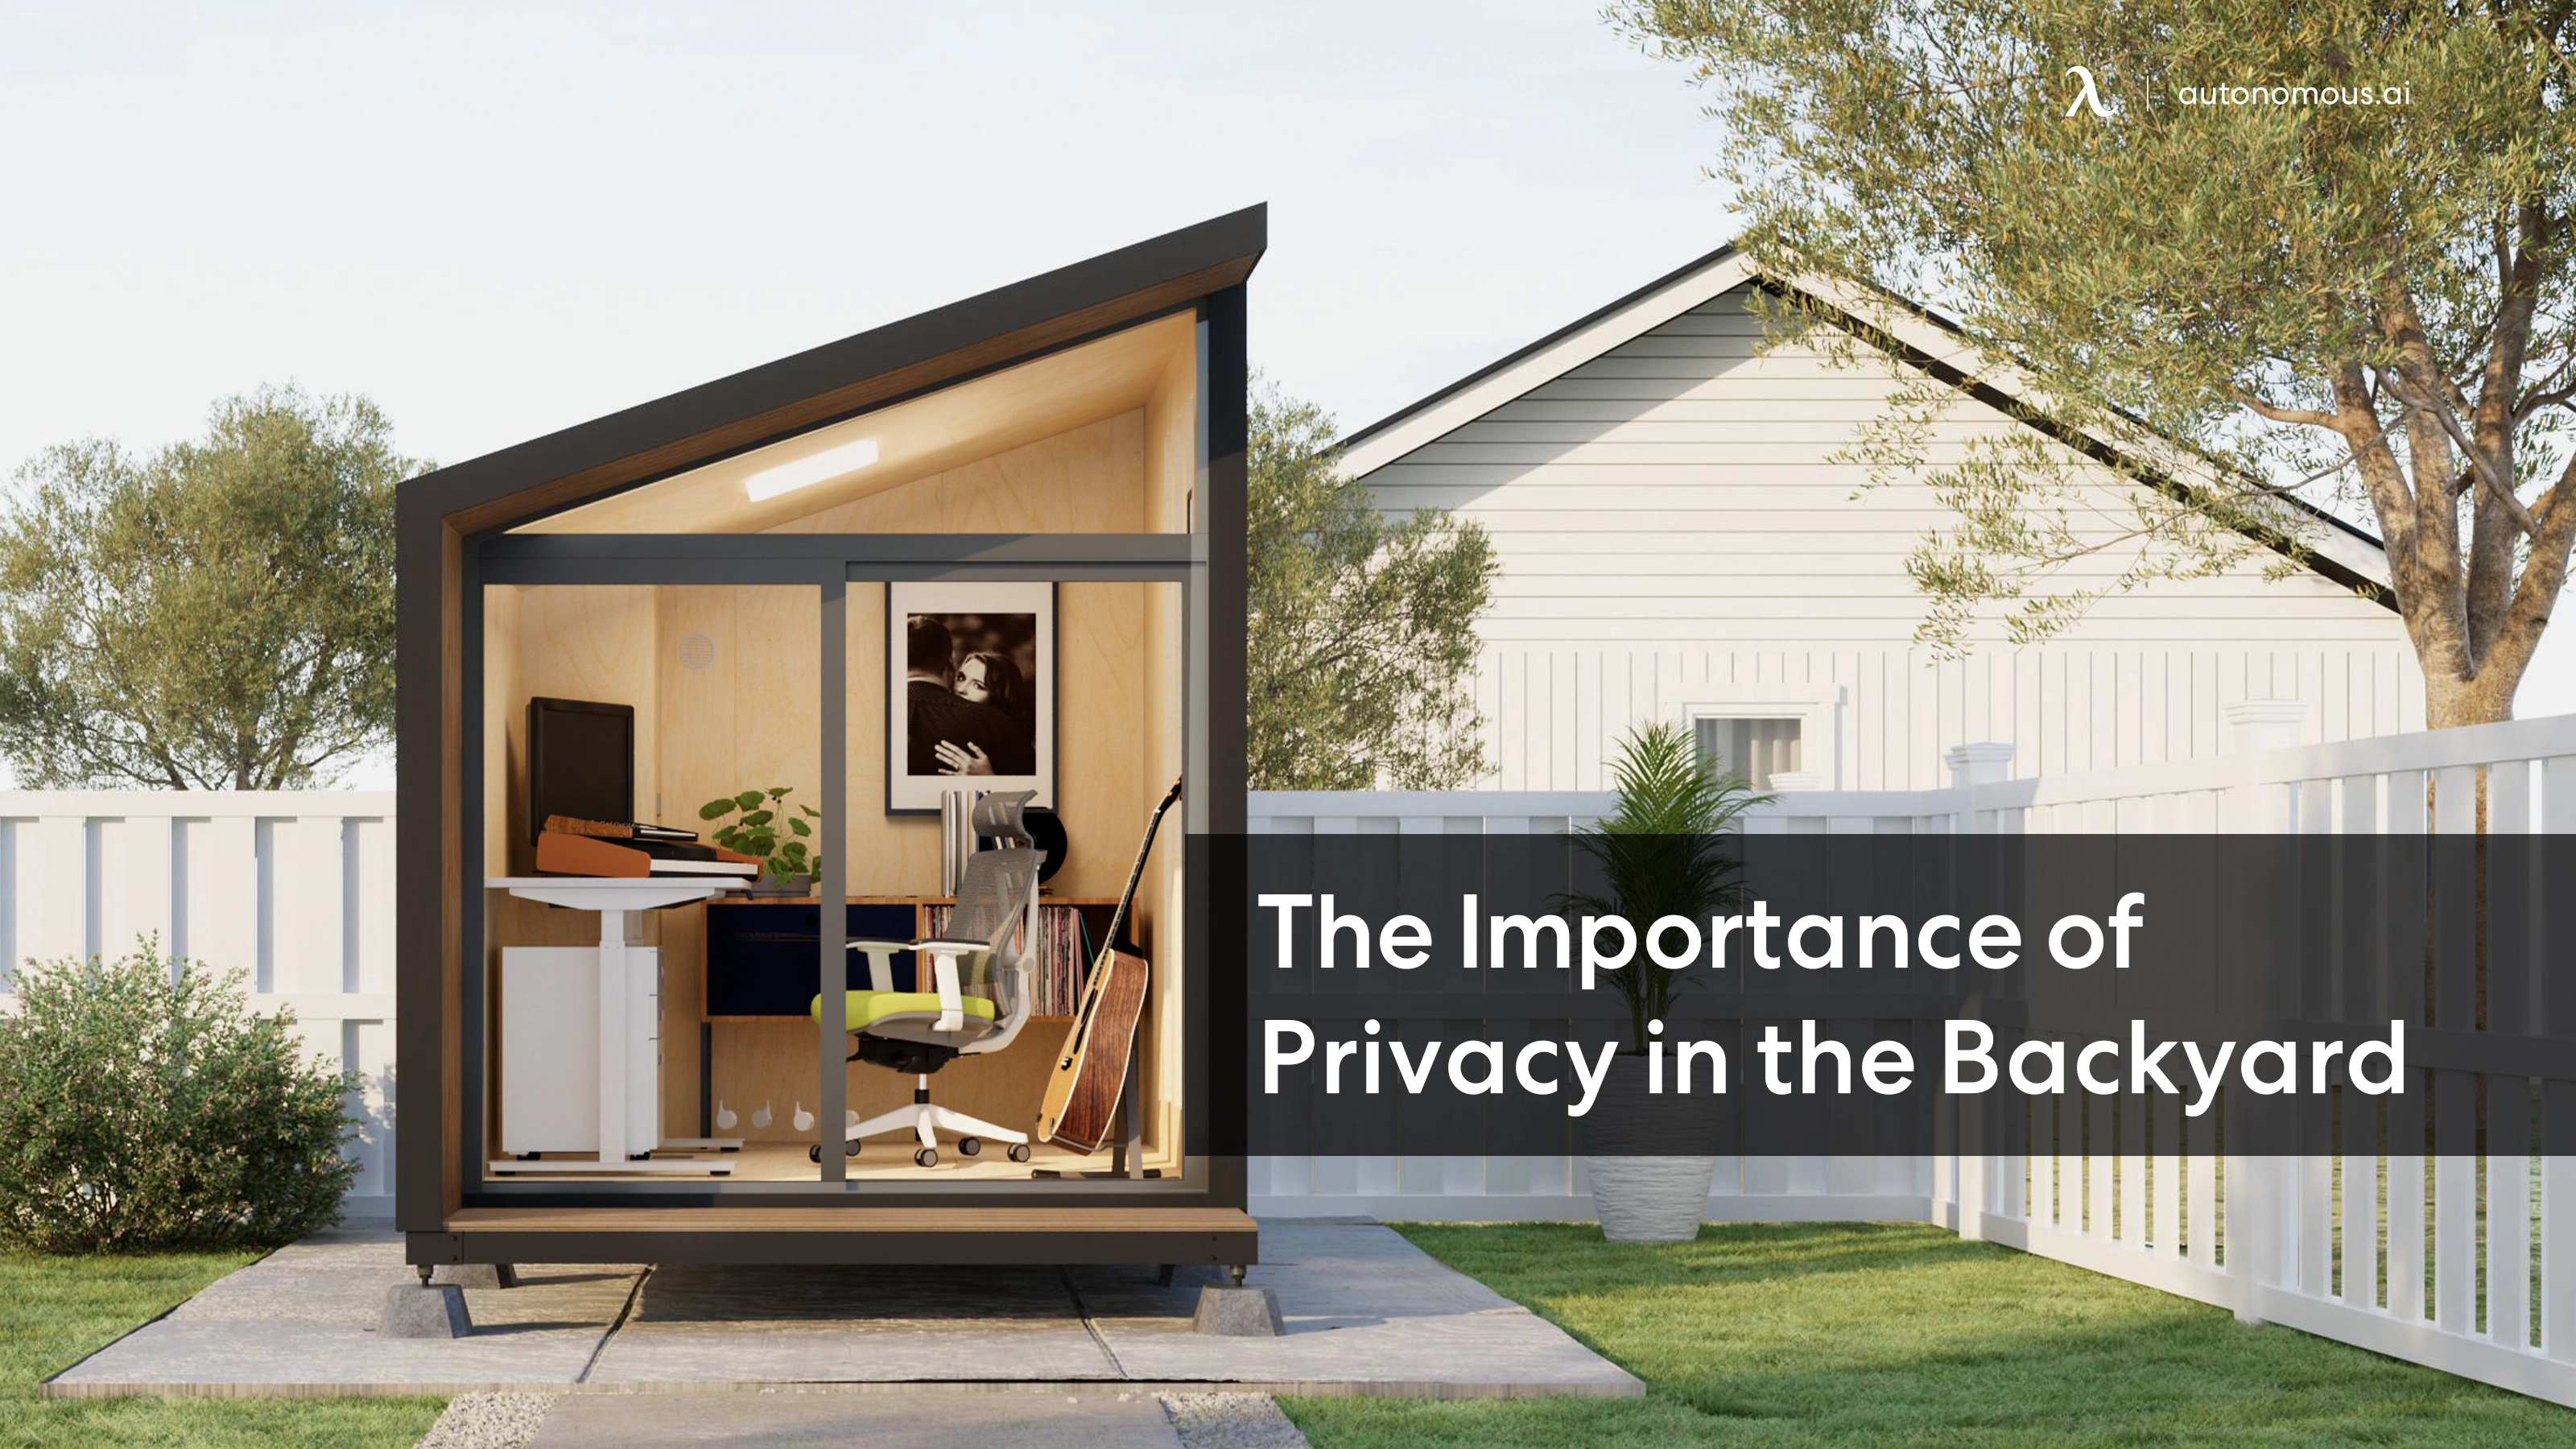 Enjoying Peace and Serenity: The Importance of Privacy in the Backyard